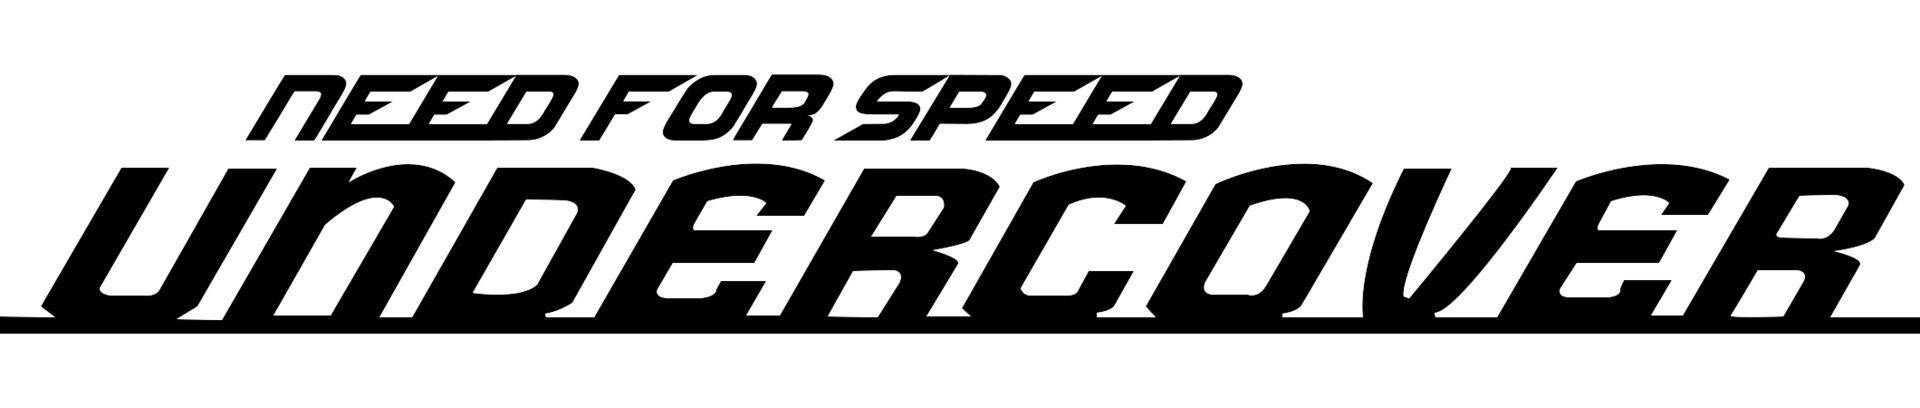 Need for Speed Undercover Logo - Need for Speed Logos Study Mighoet Sündback